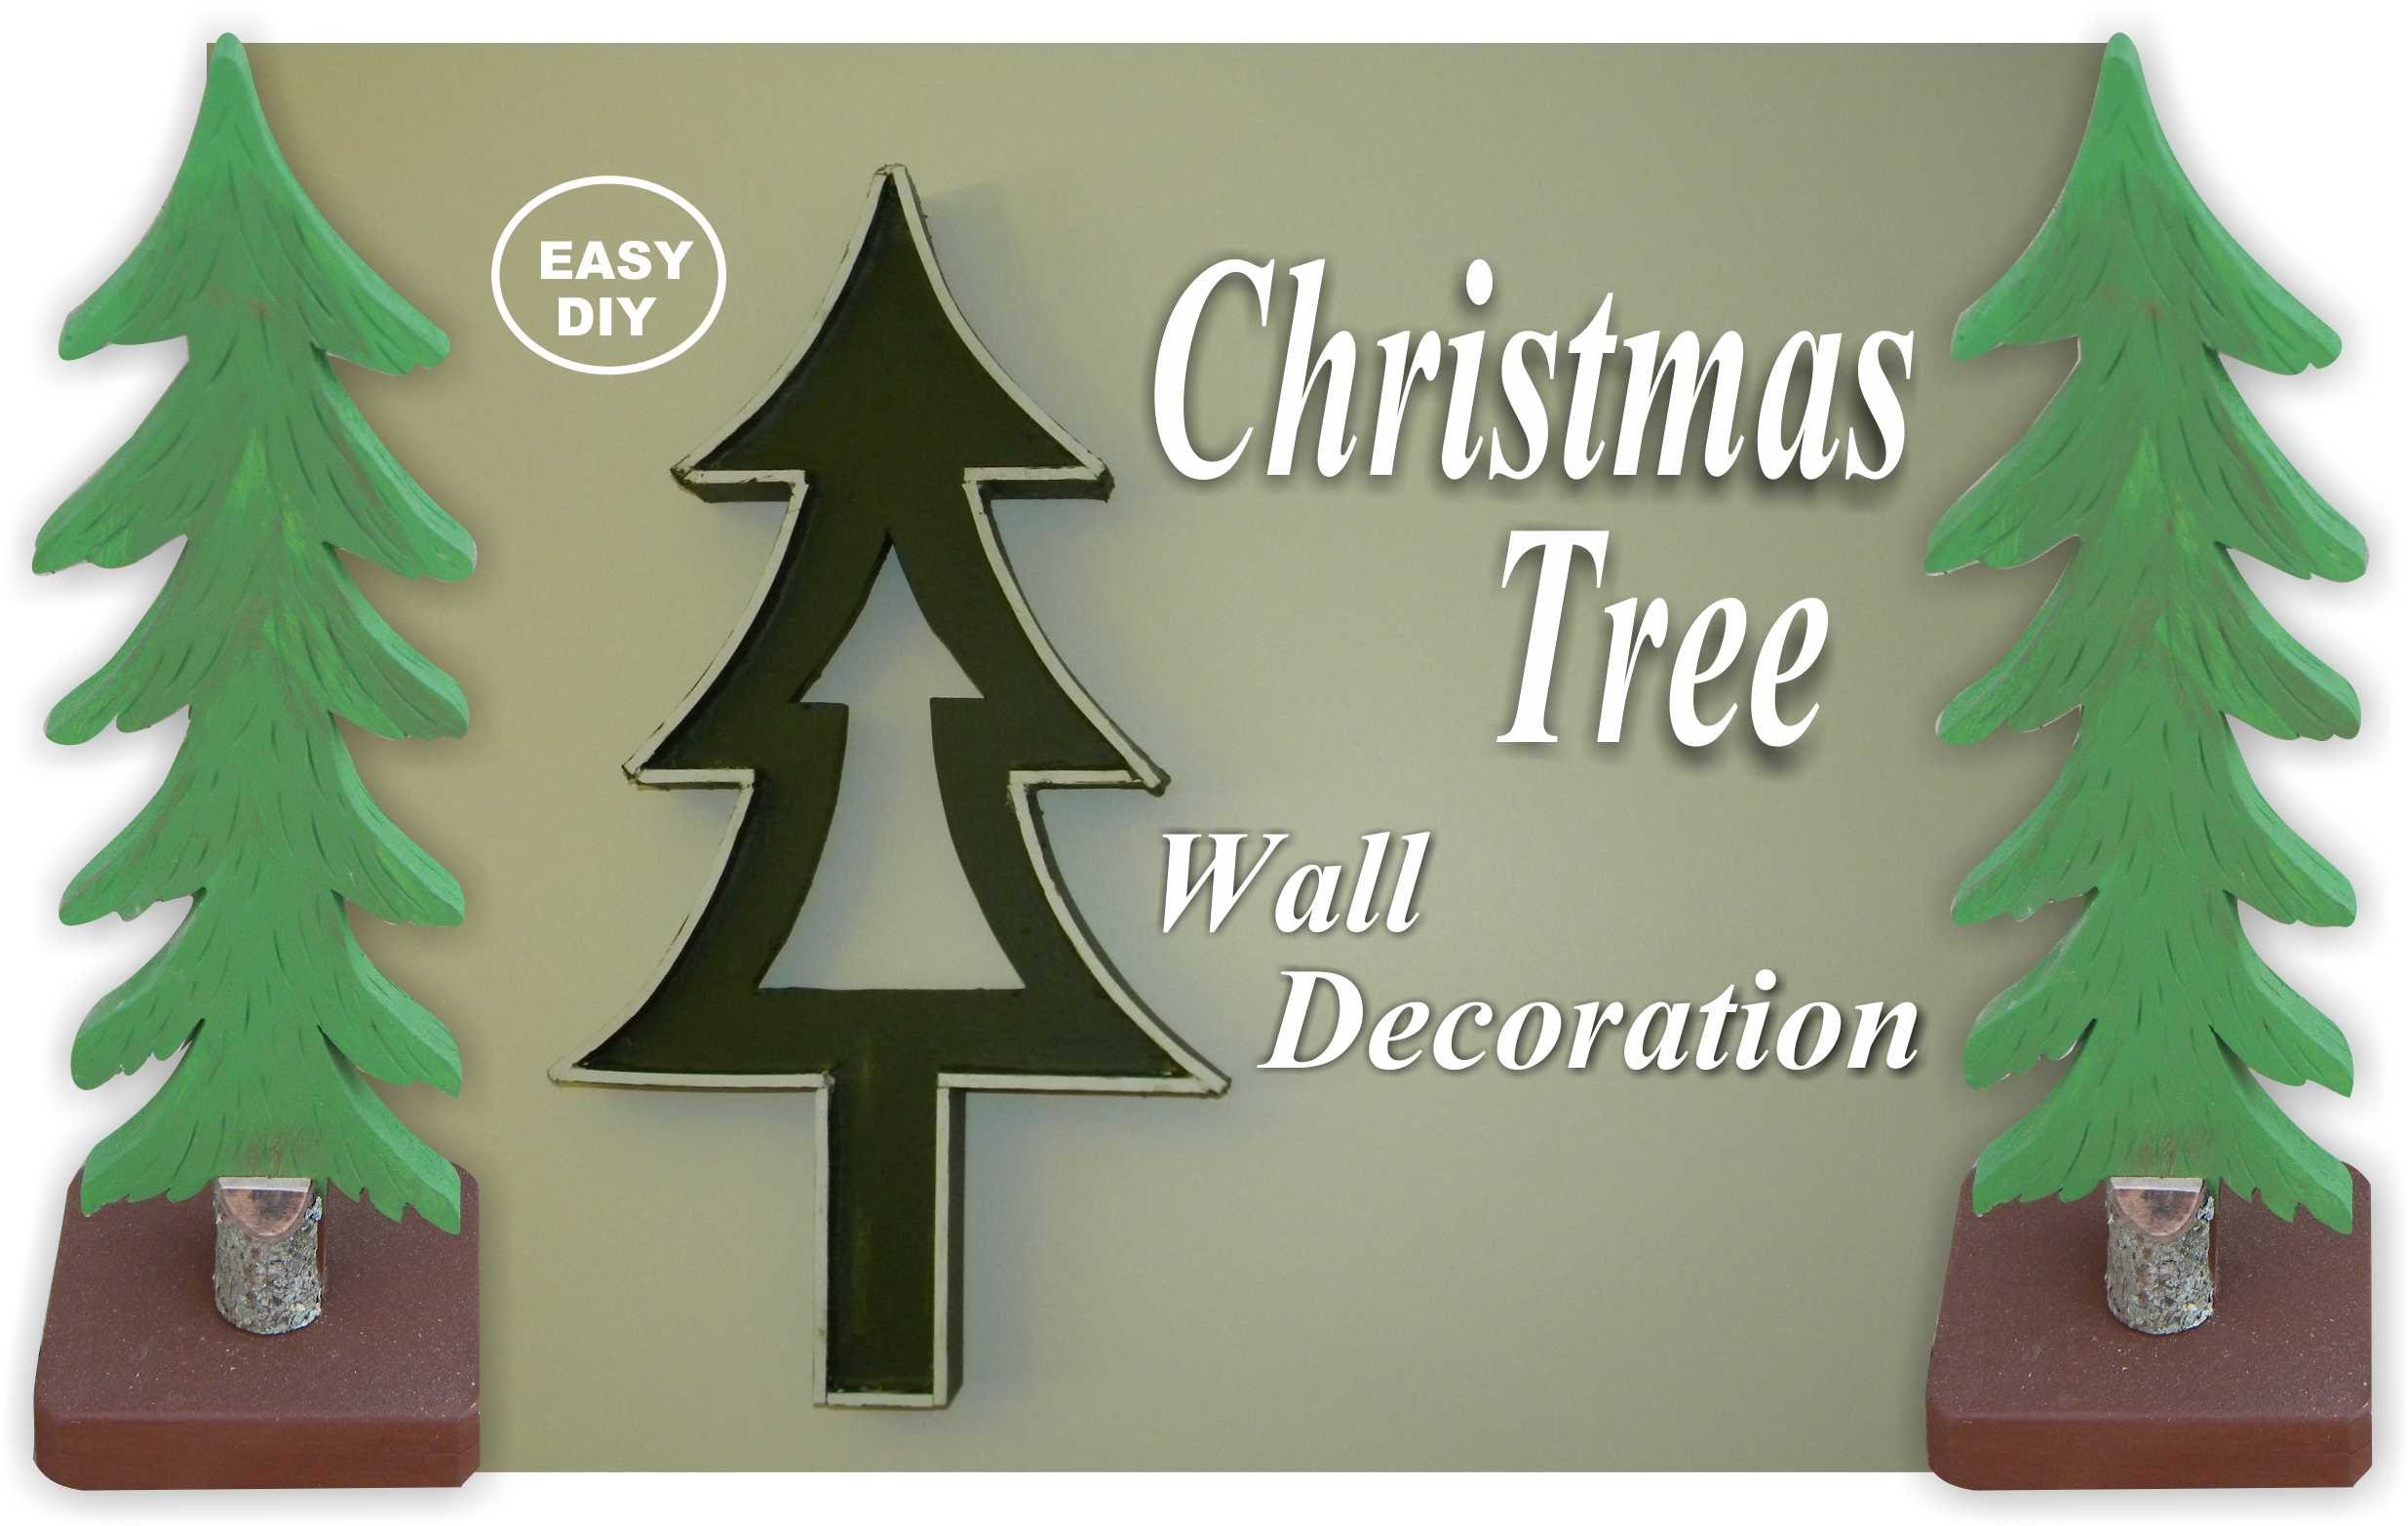 How to make an Easy DIY Christmas Tree Wall Decoration